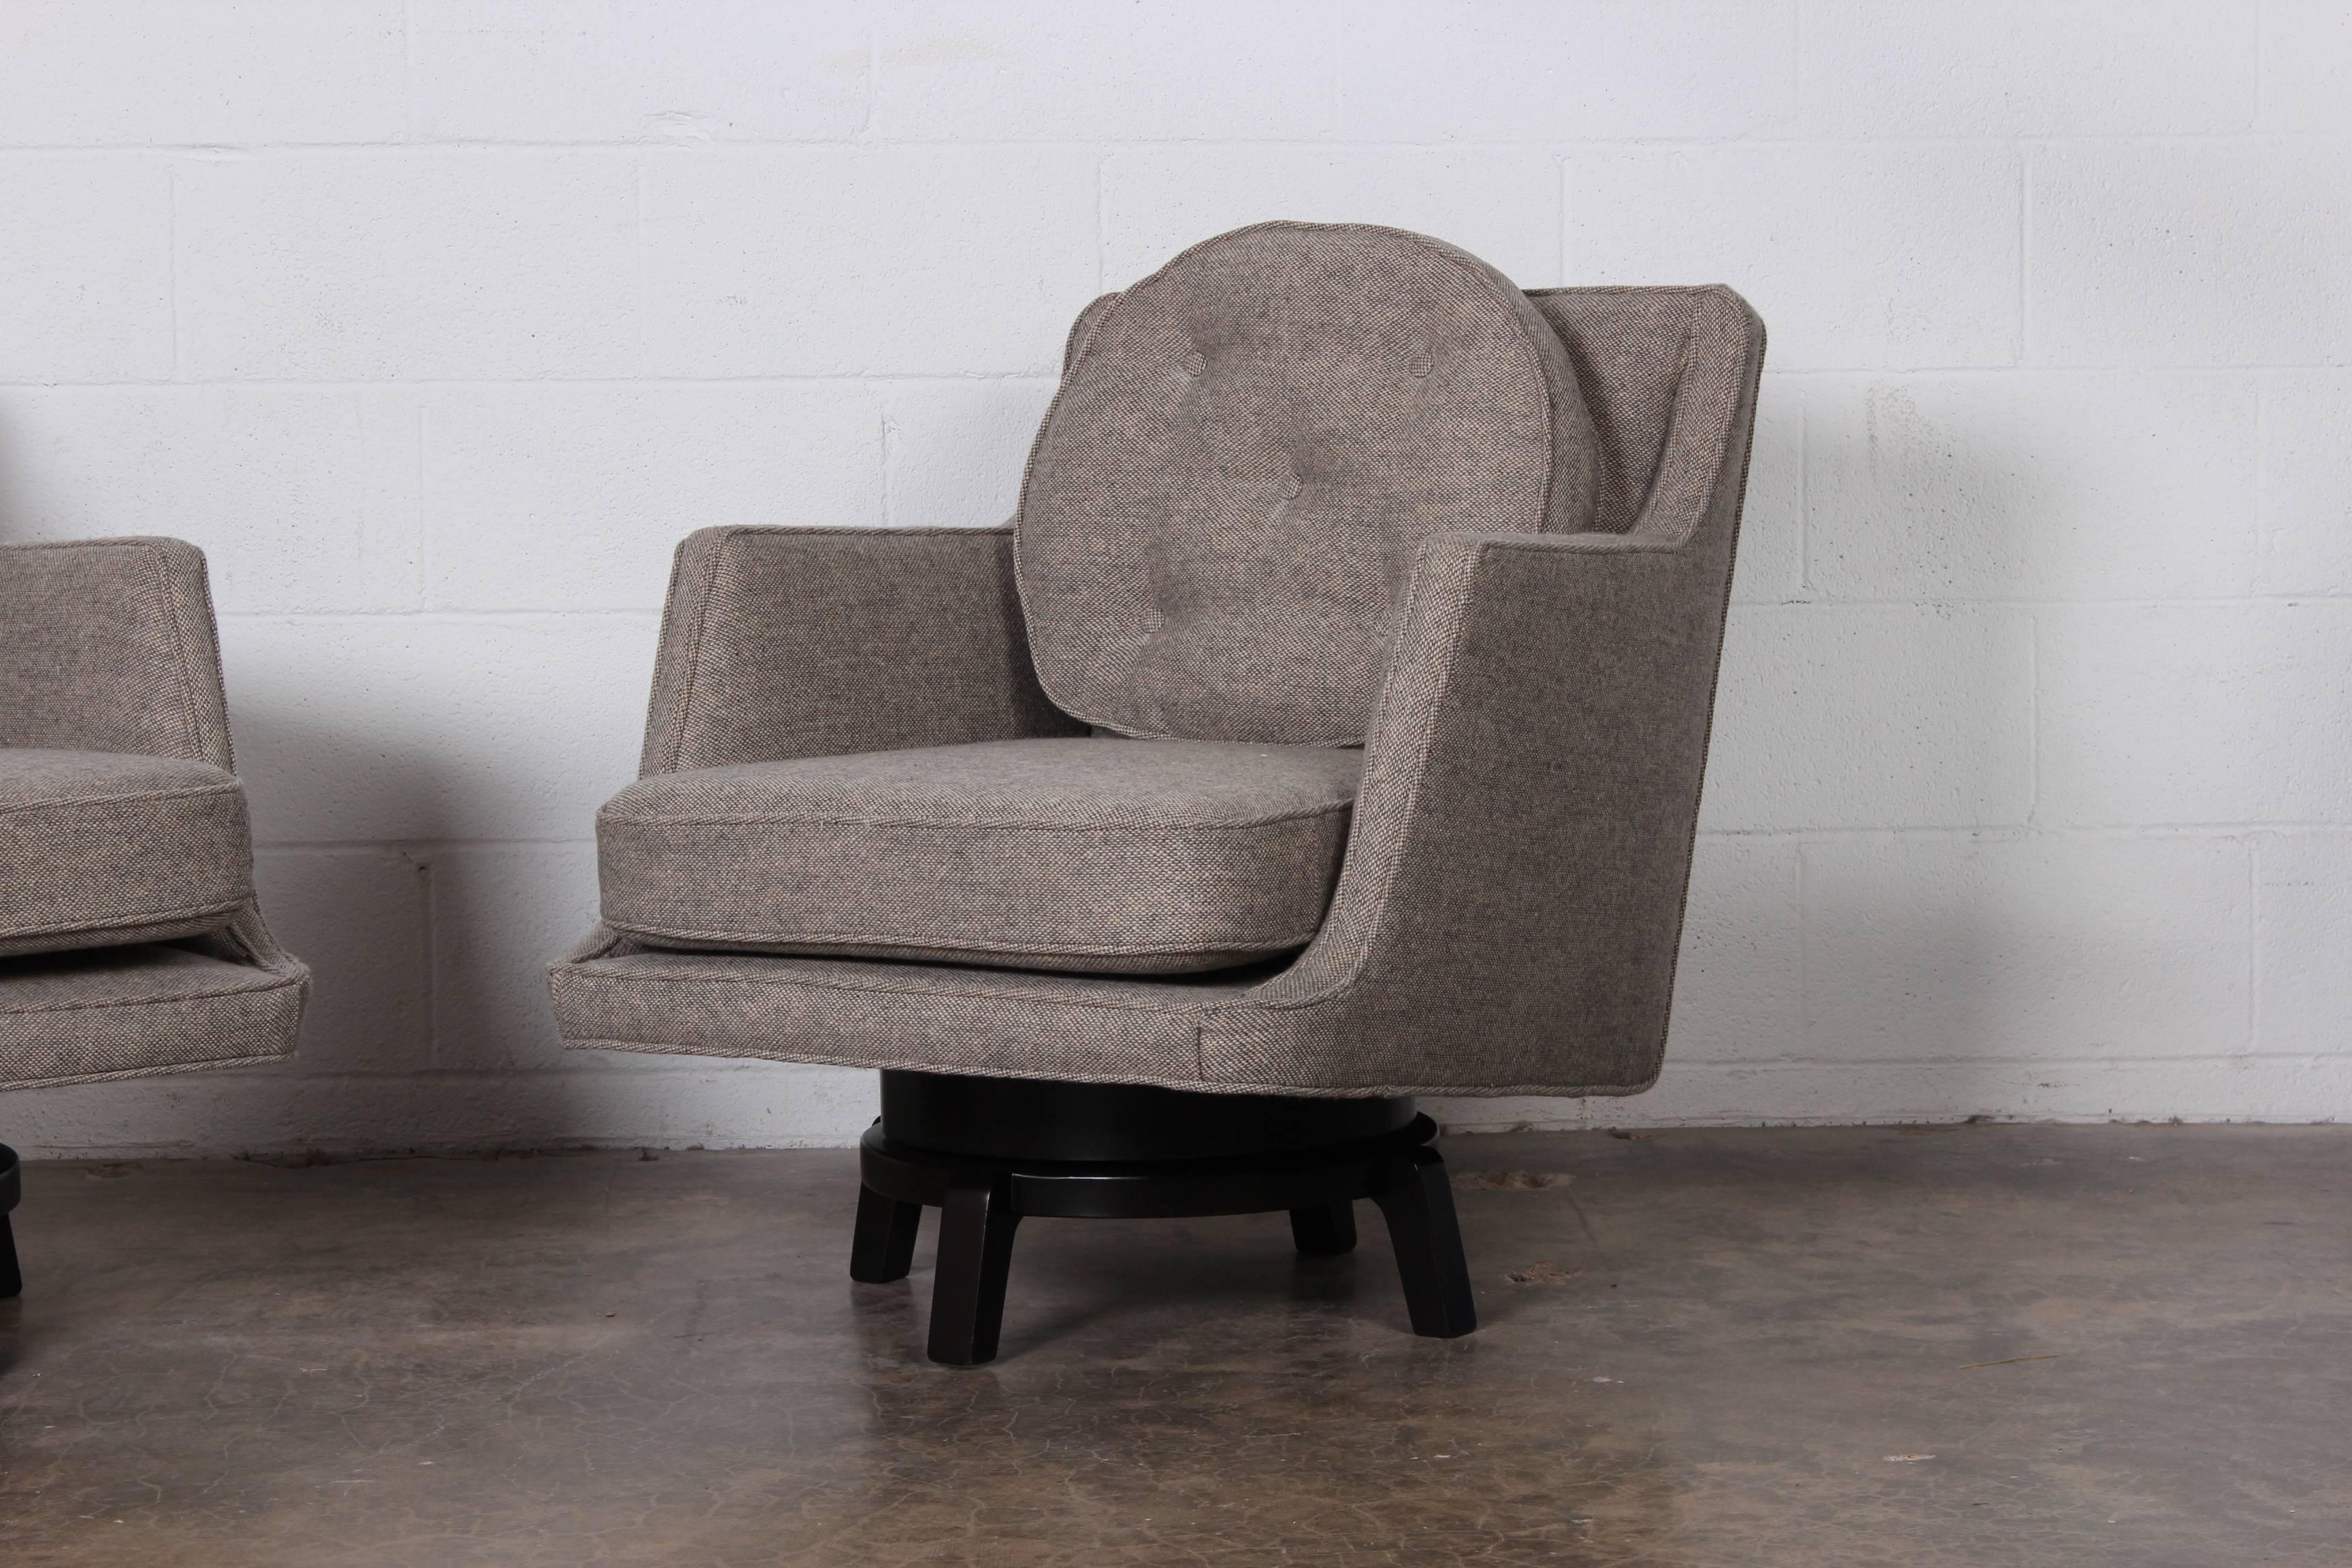 Pair of Swivel Chairs by Edward Wormley for Dunbar 2